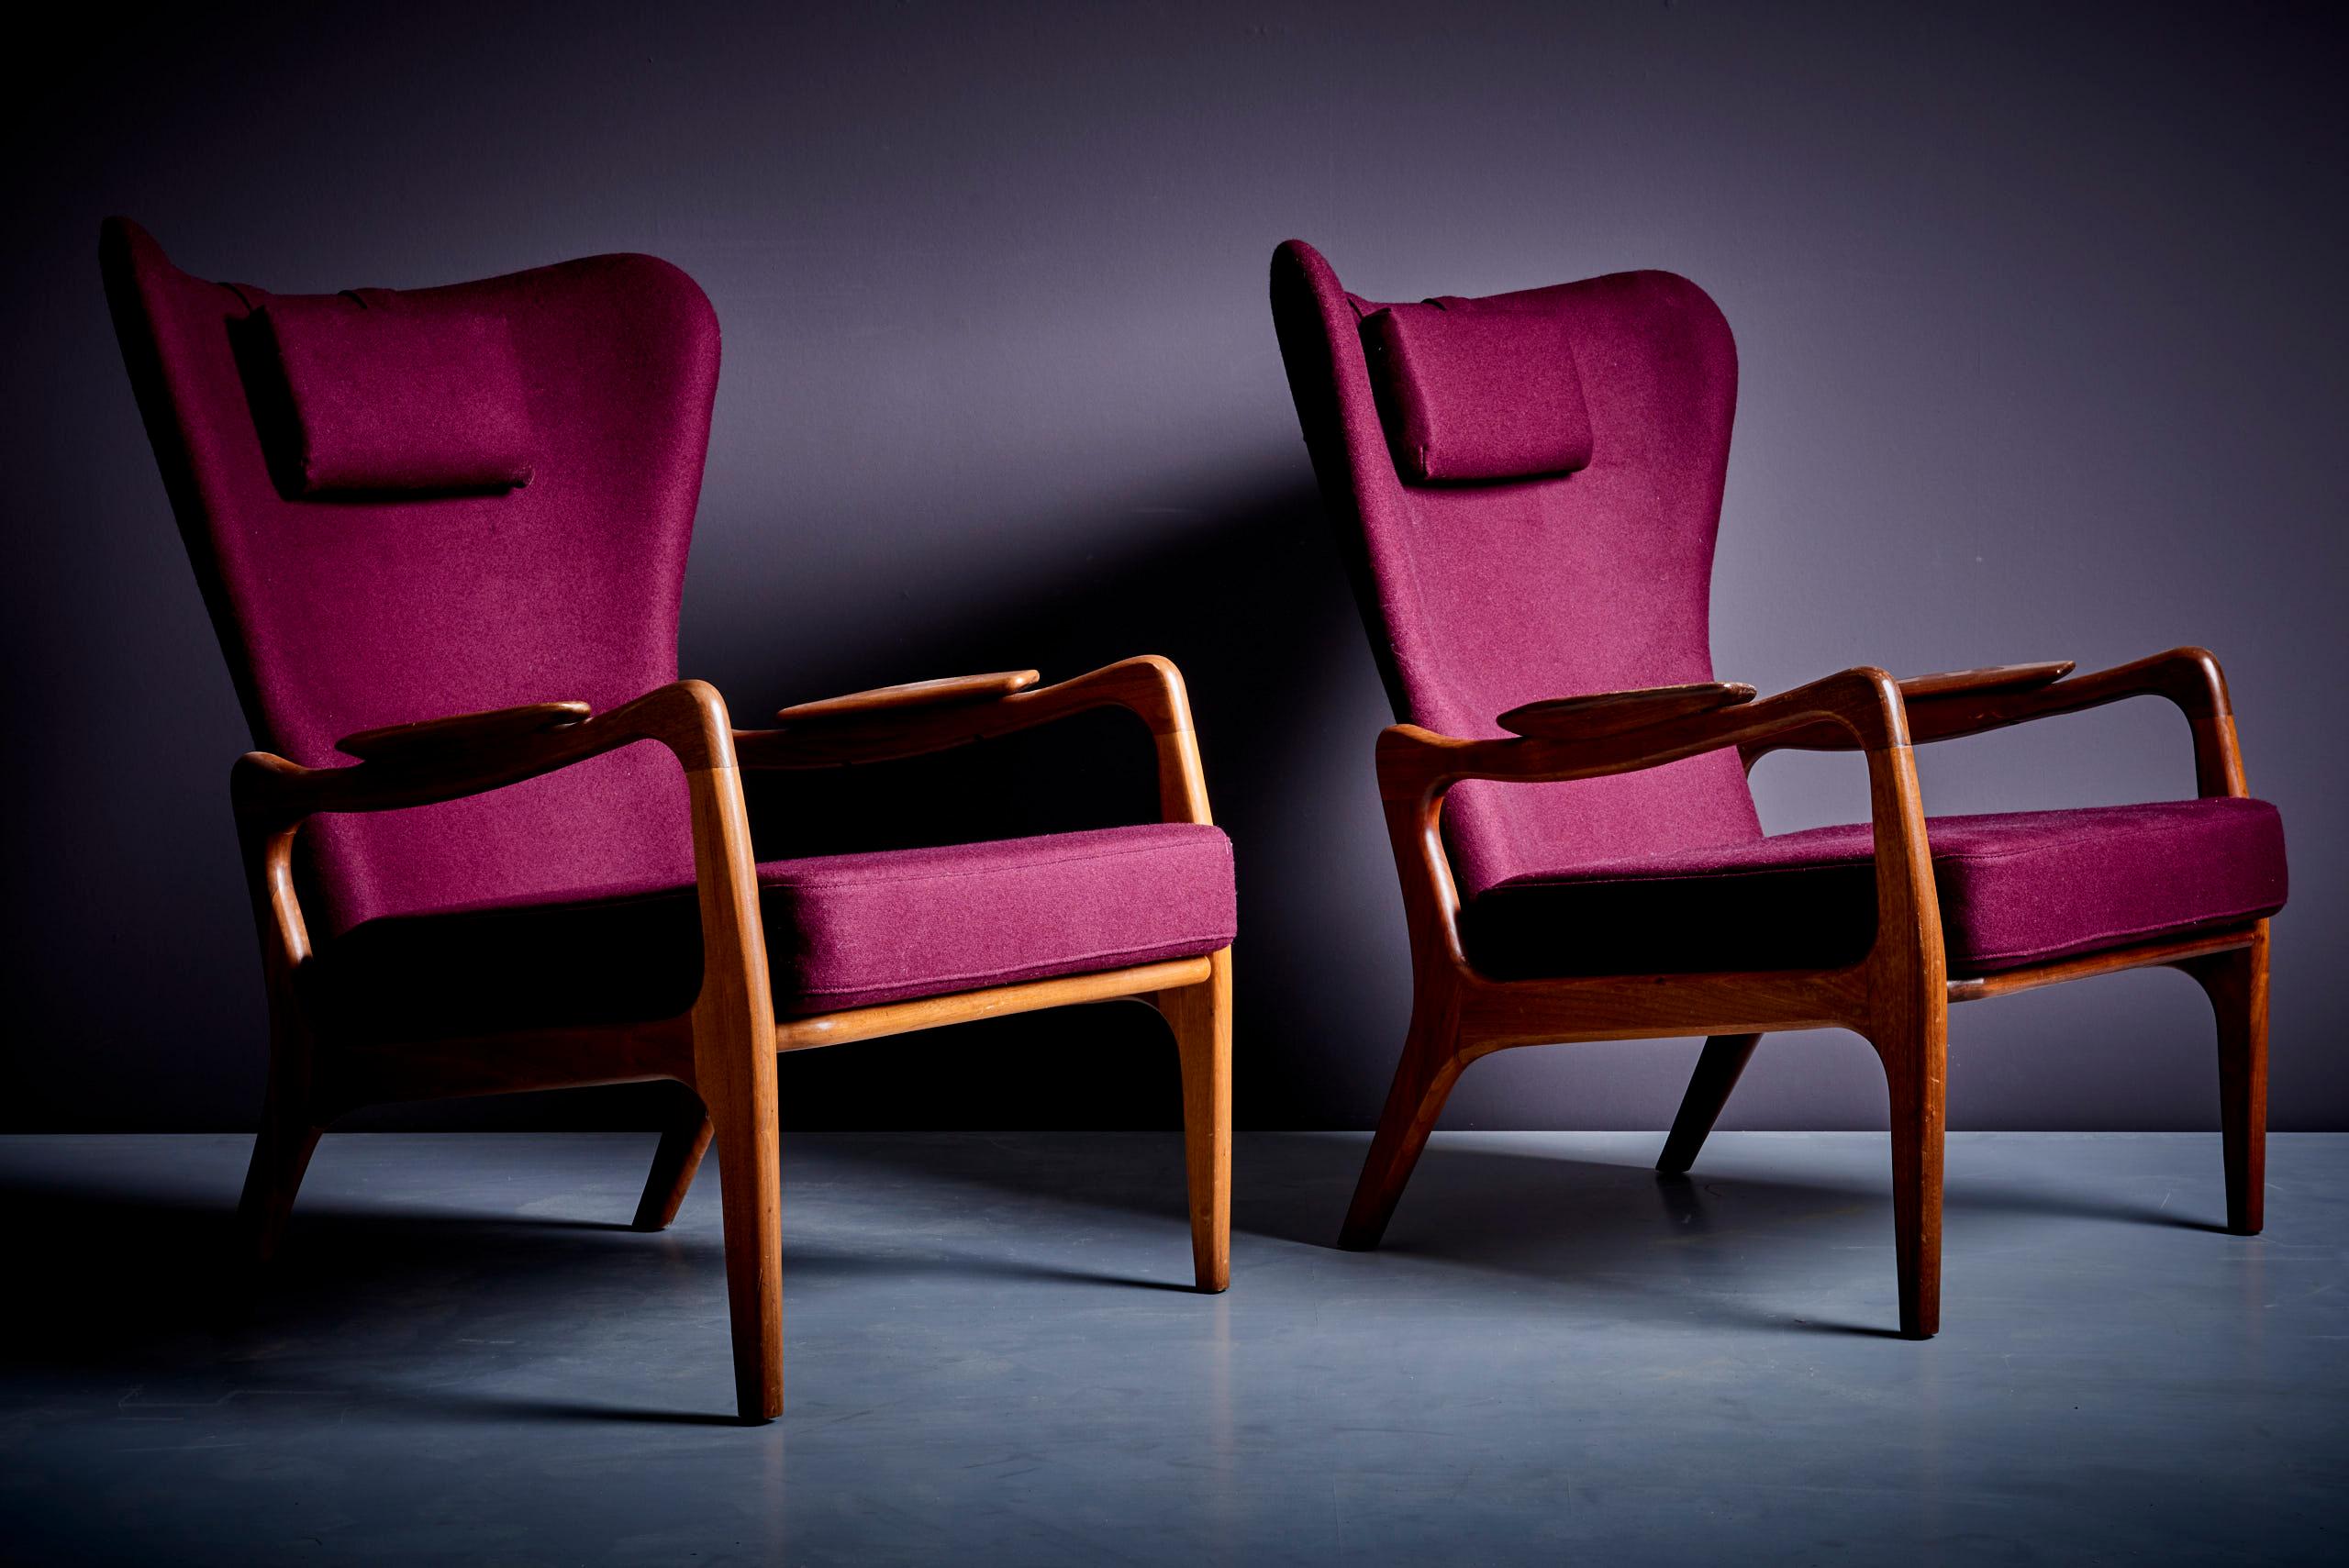 Newly Restored Pair of Plum Adrian Pearsall High Back Wing Lounge Chair 1950s For Sale 6